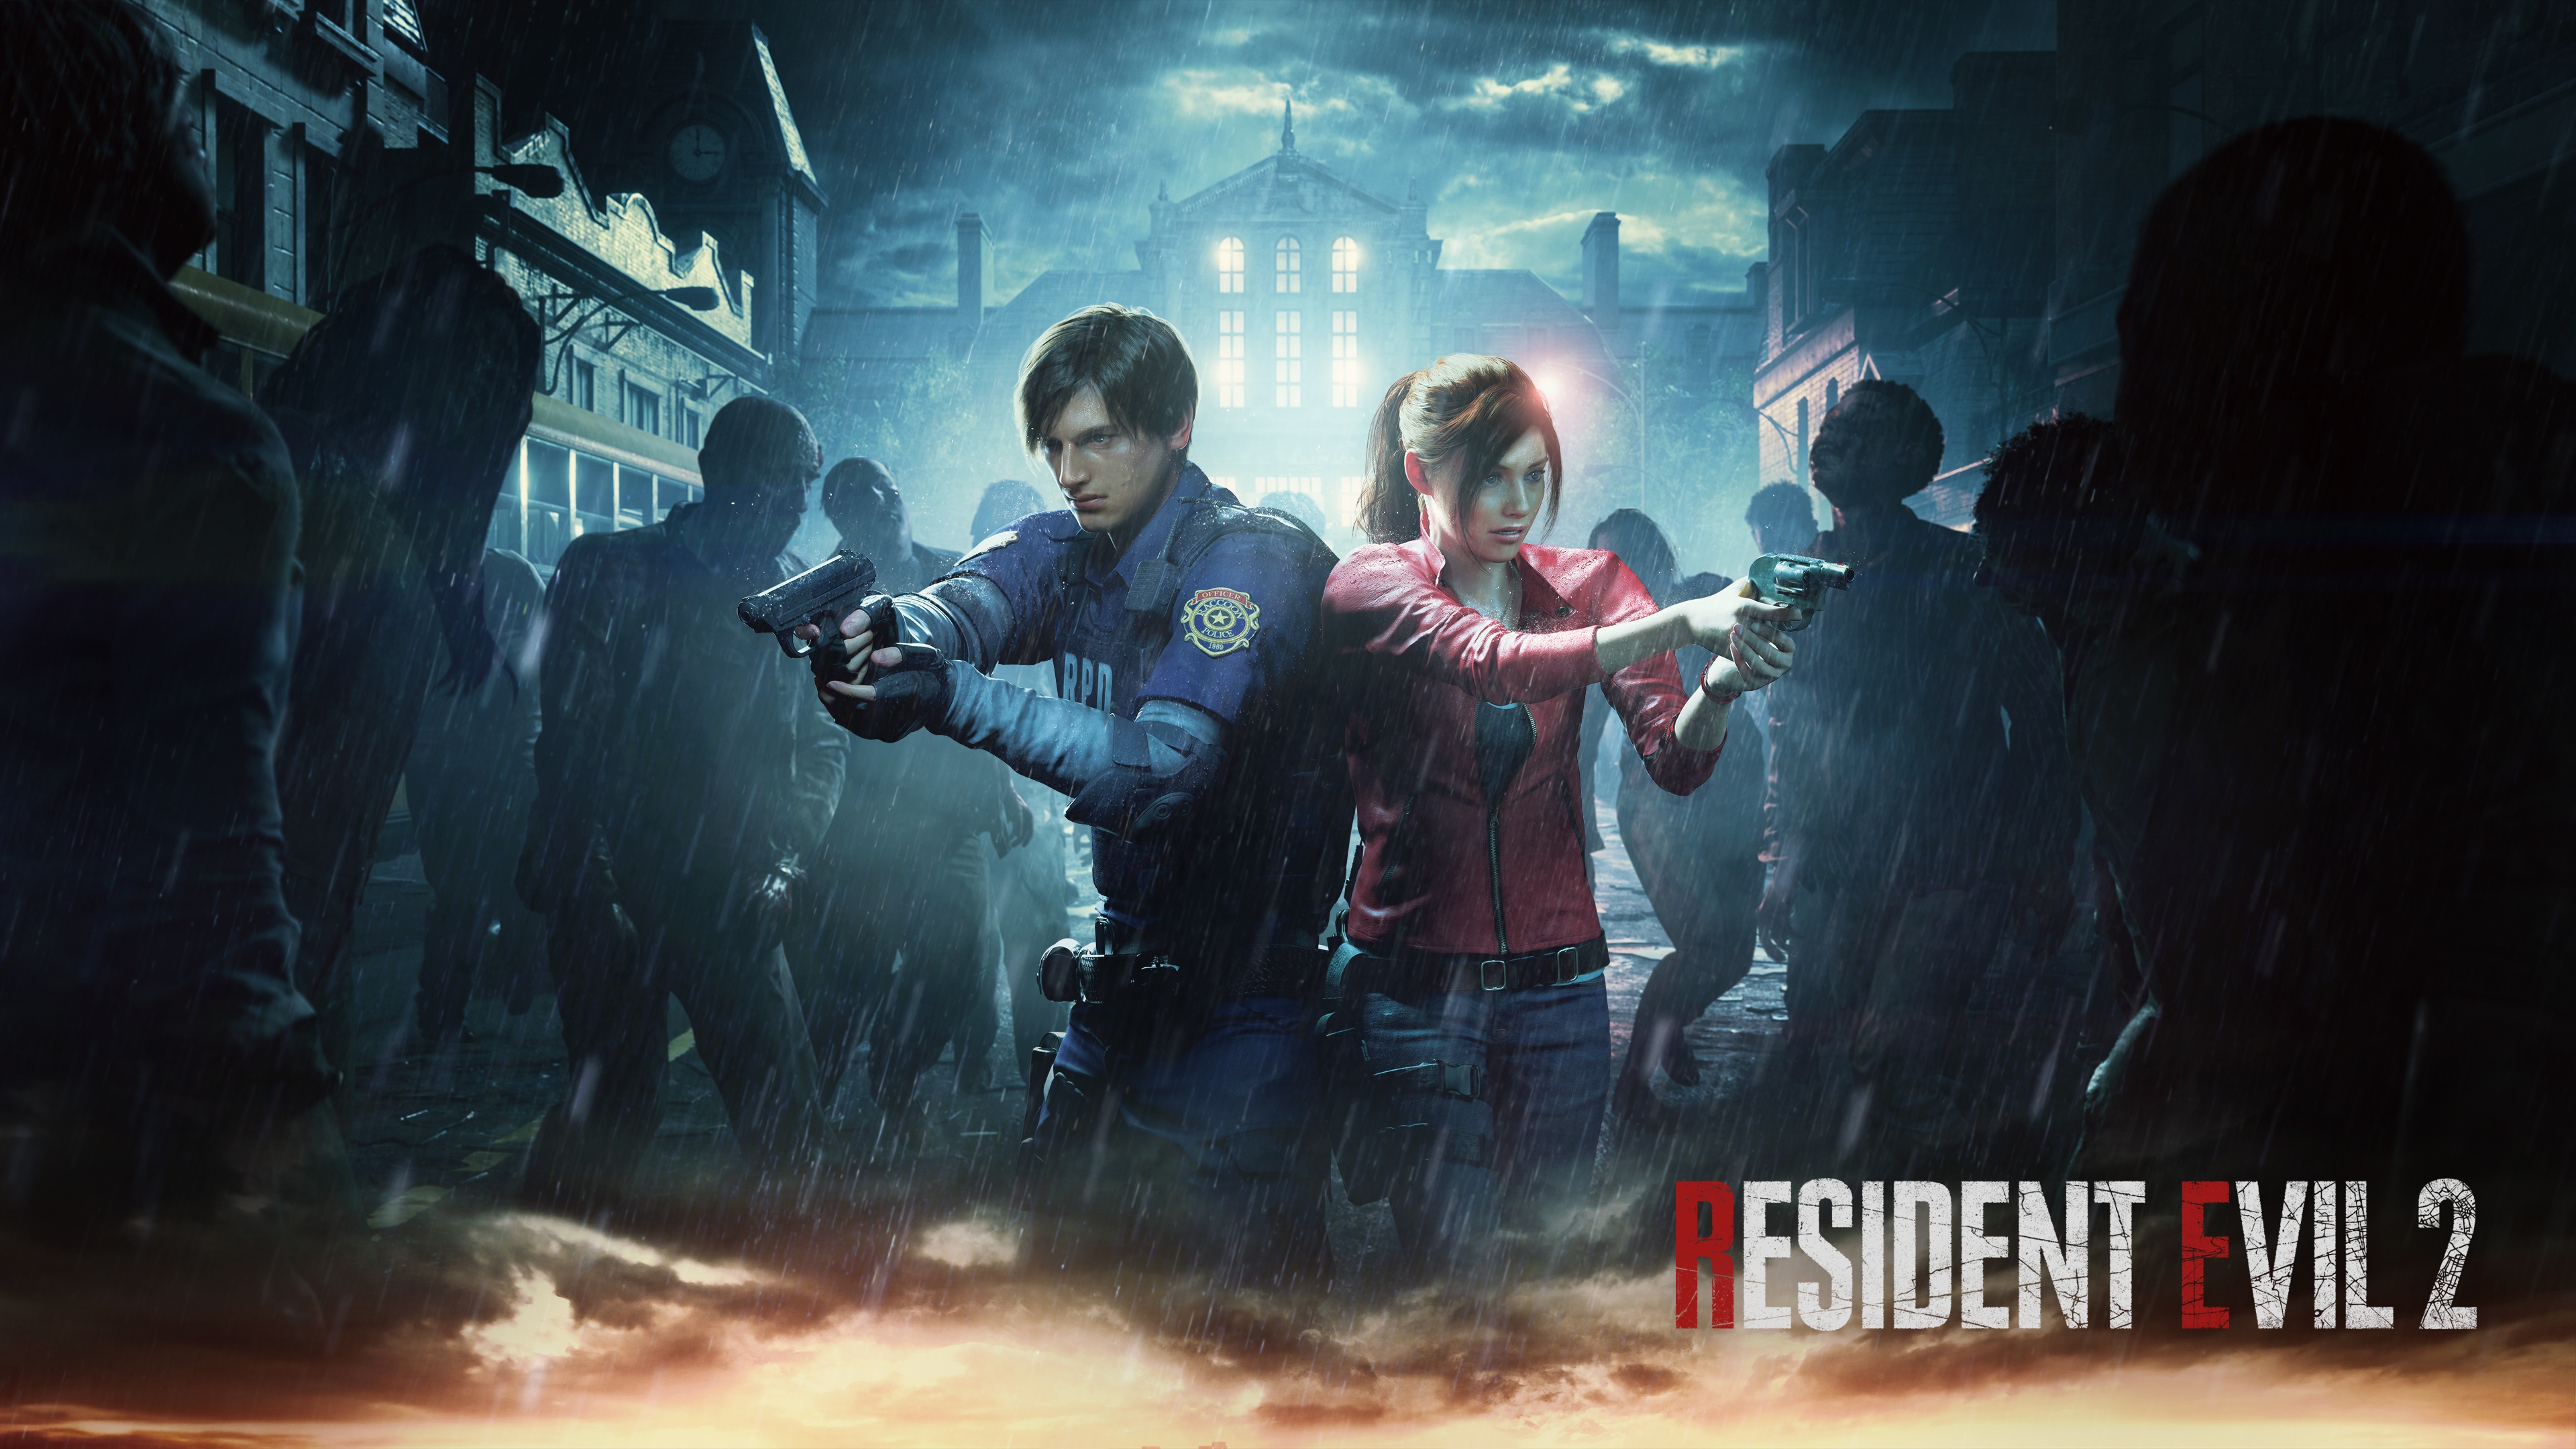 is resident evil 2 coming to switch